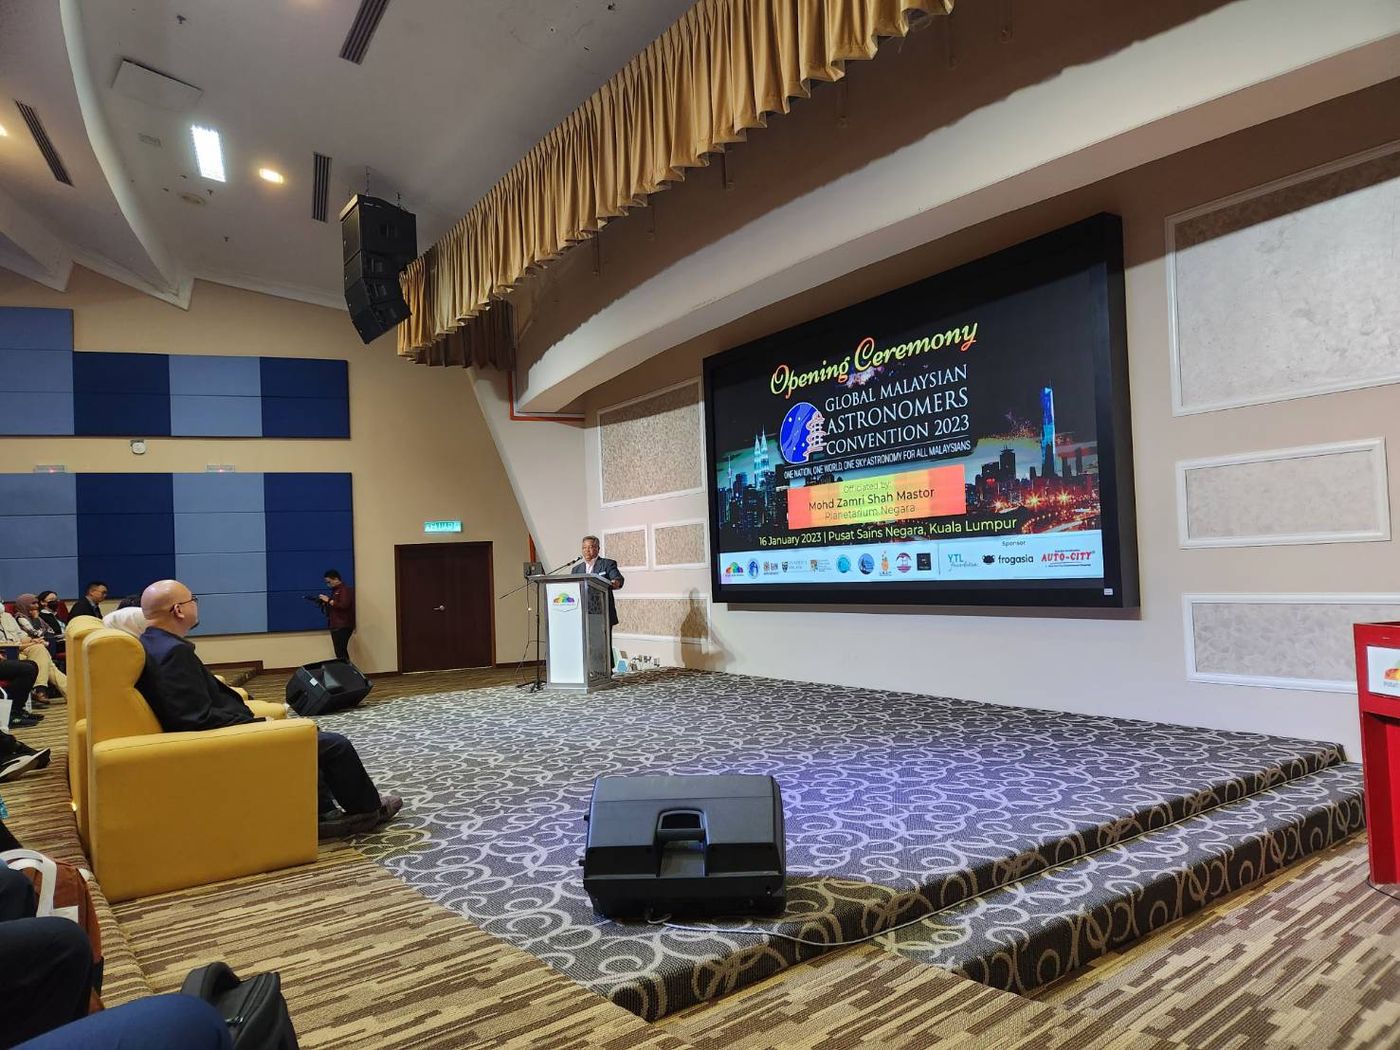 Global Malaysian astronomers convene in KL as NARIT shares its achievement